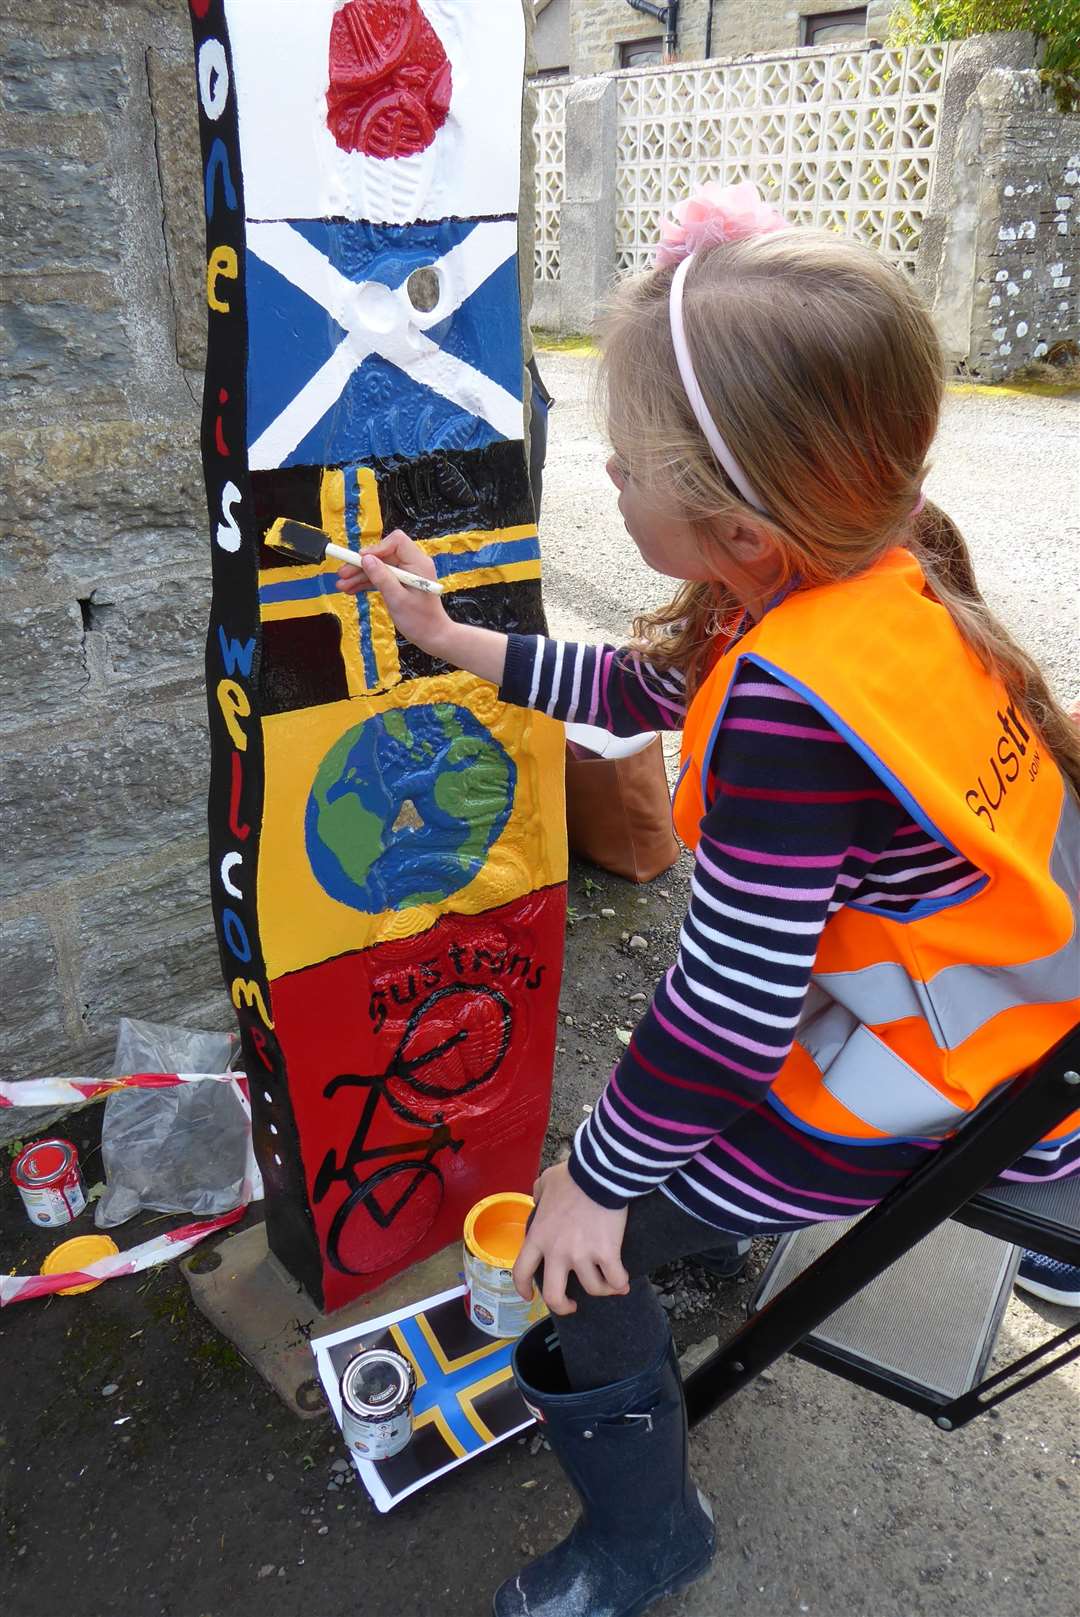 Ava painting the Caithness flag onto the route marker.